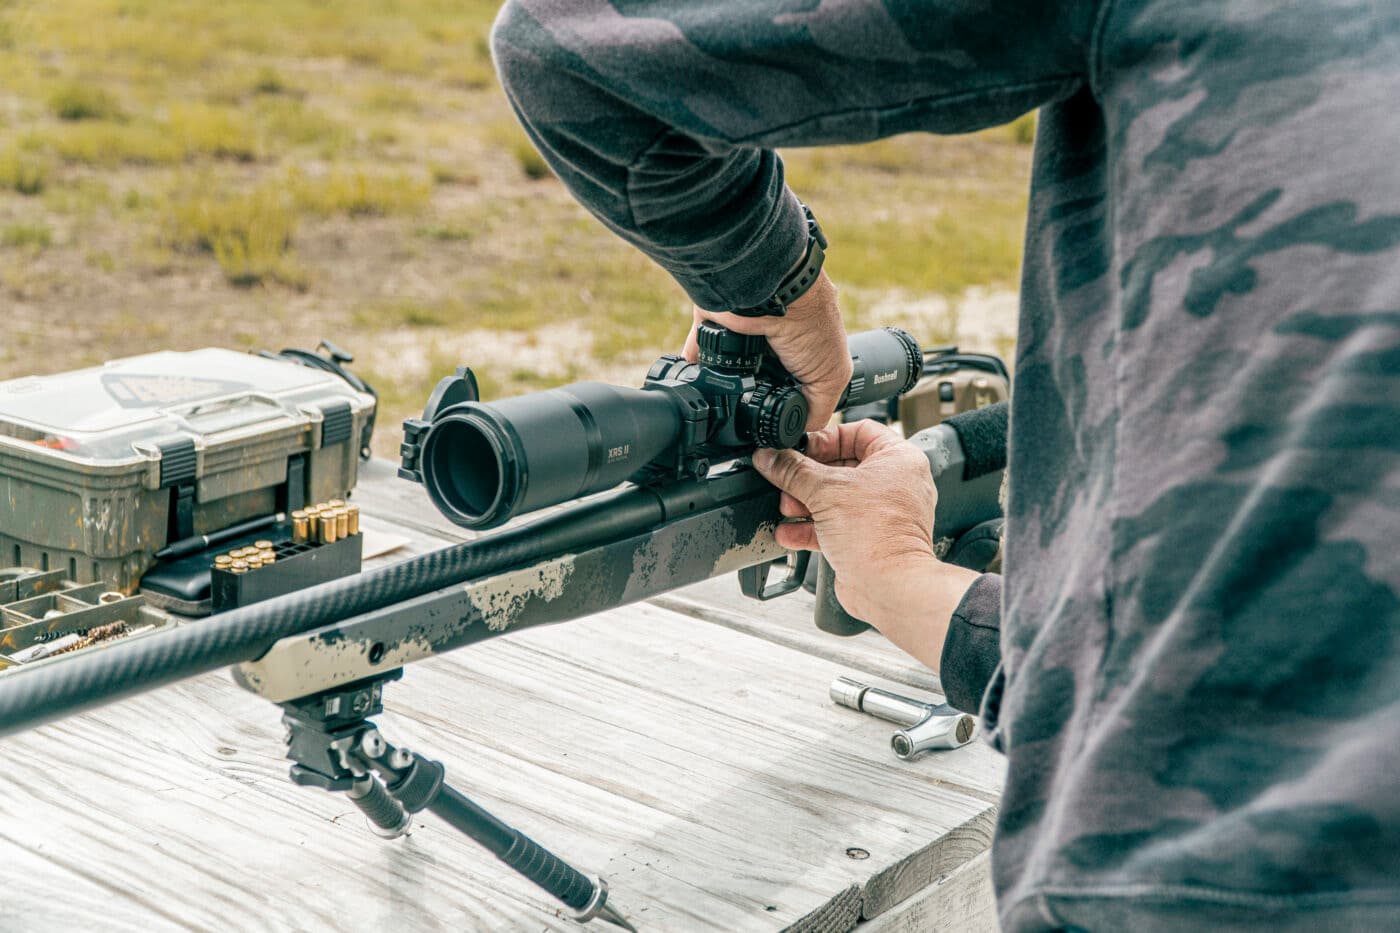 Man installing a scope on a Waypoint rifle